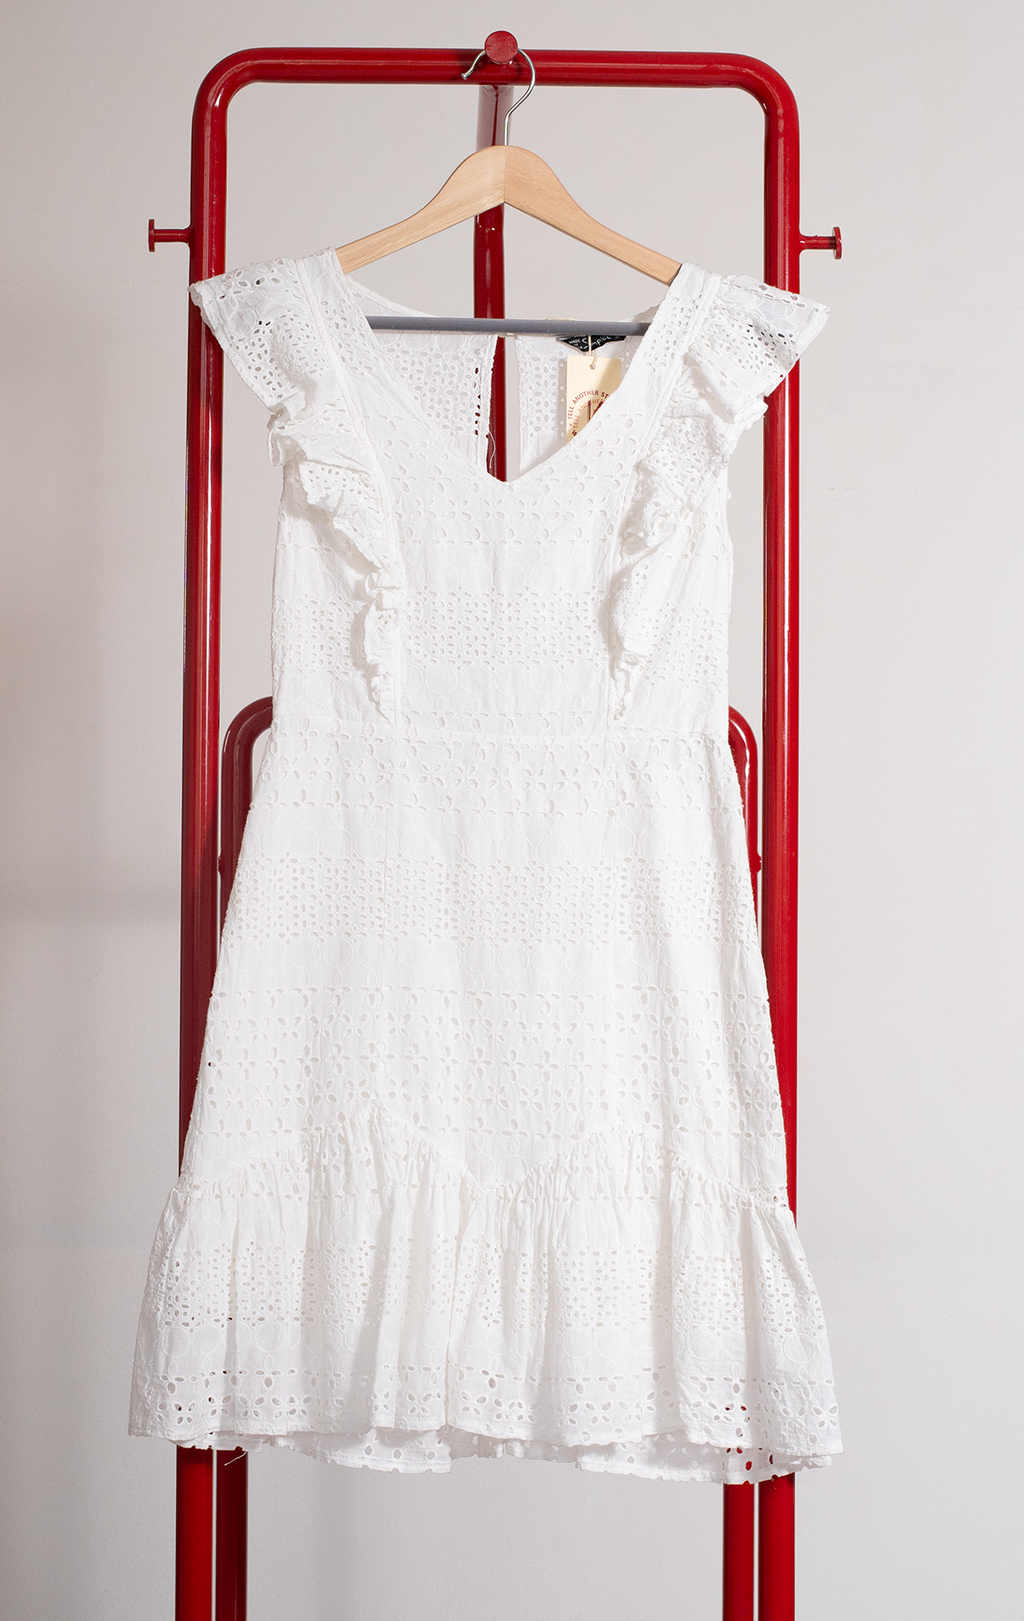 SIMPLEE DRESS - White with ruffles details - Medium